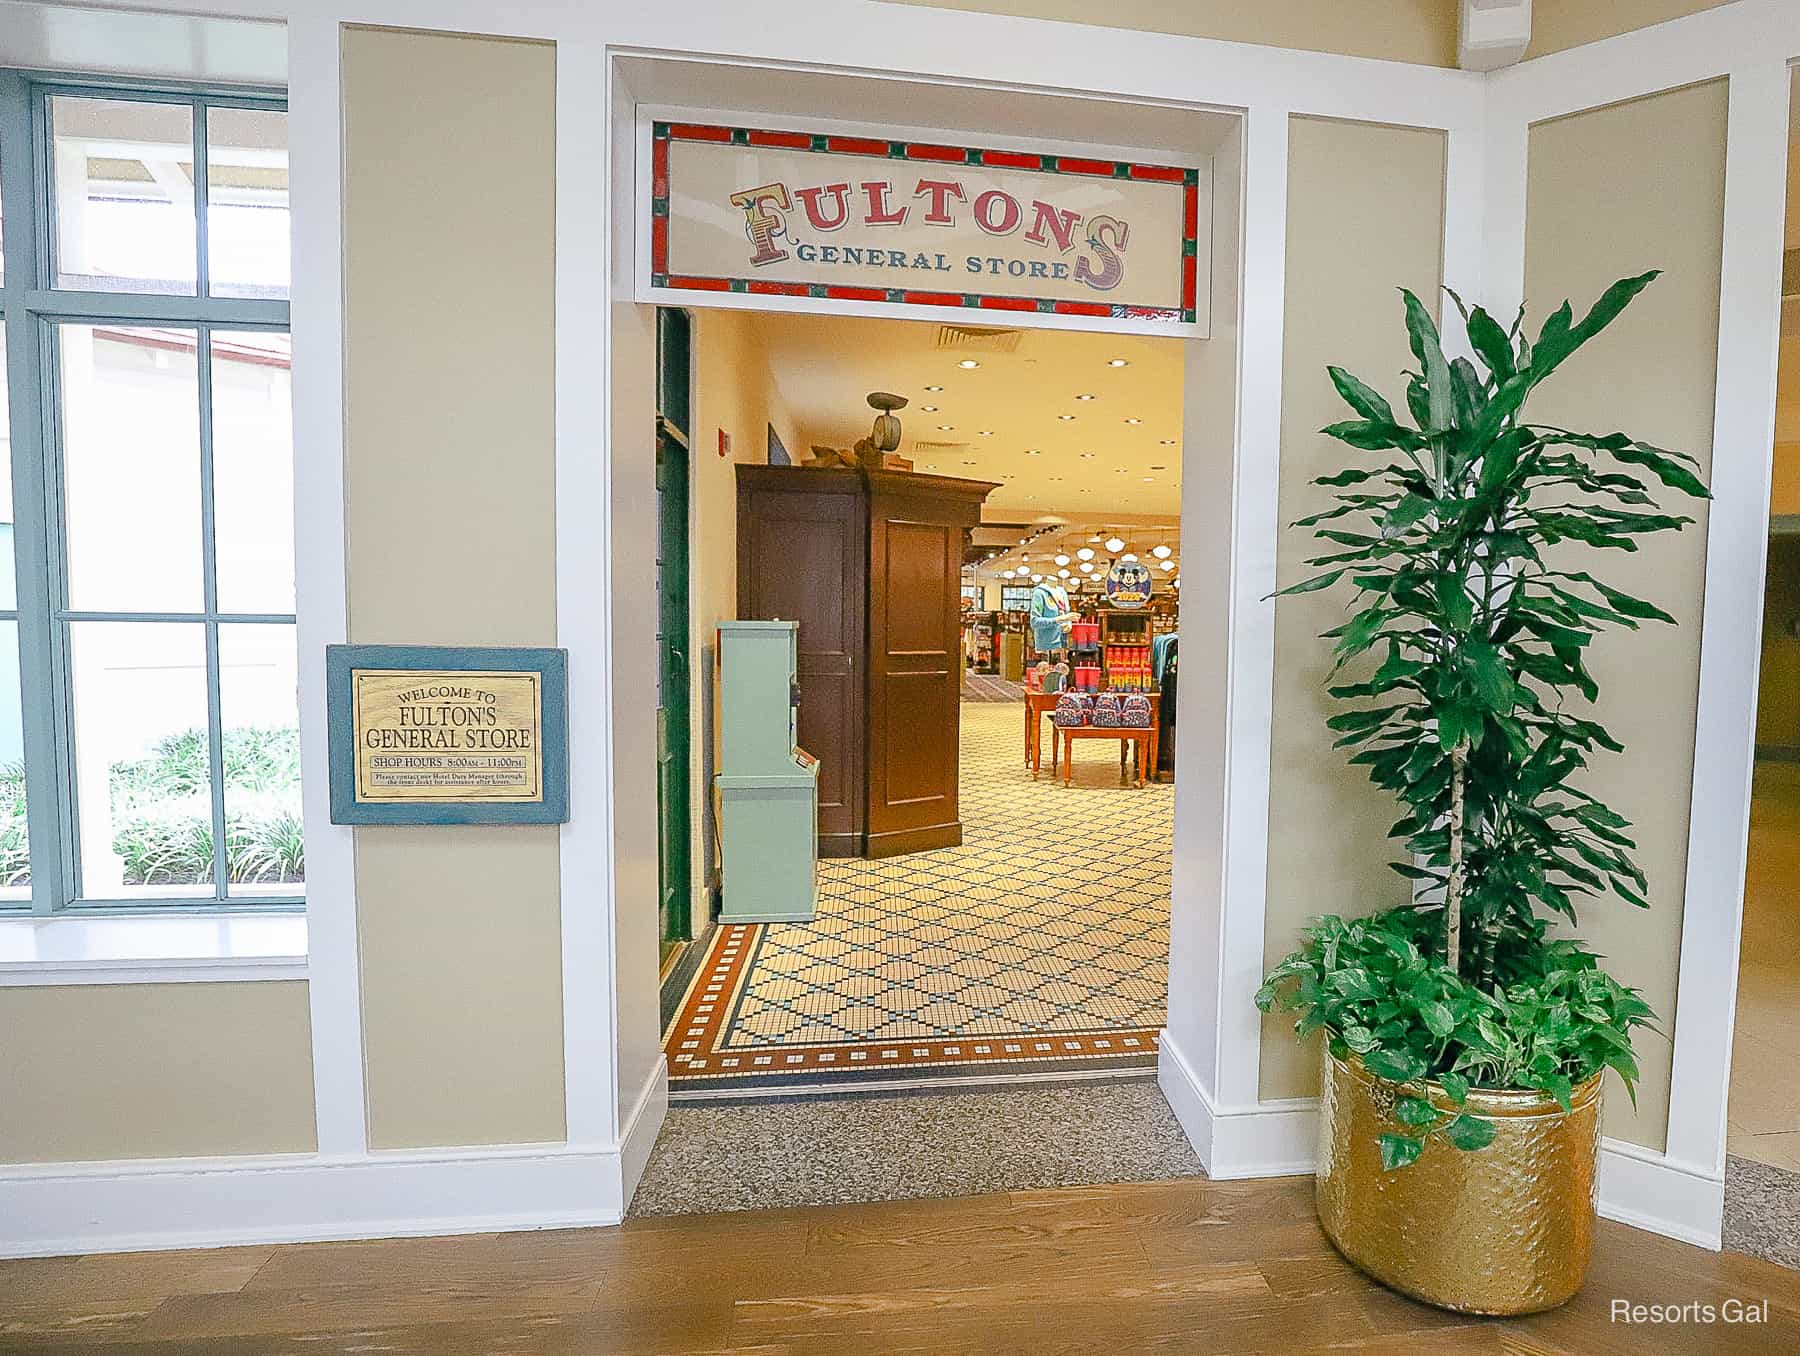 Fulton's Gift Shop with photos of the merchandise